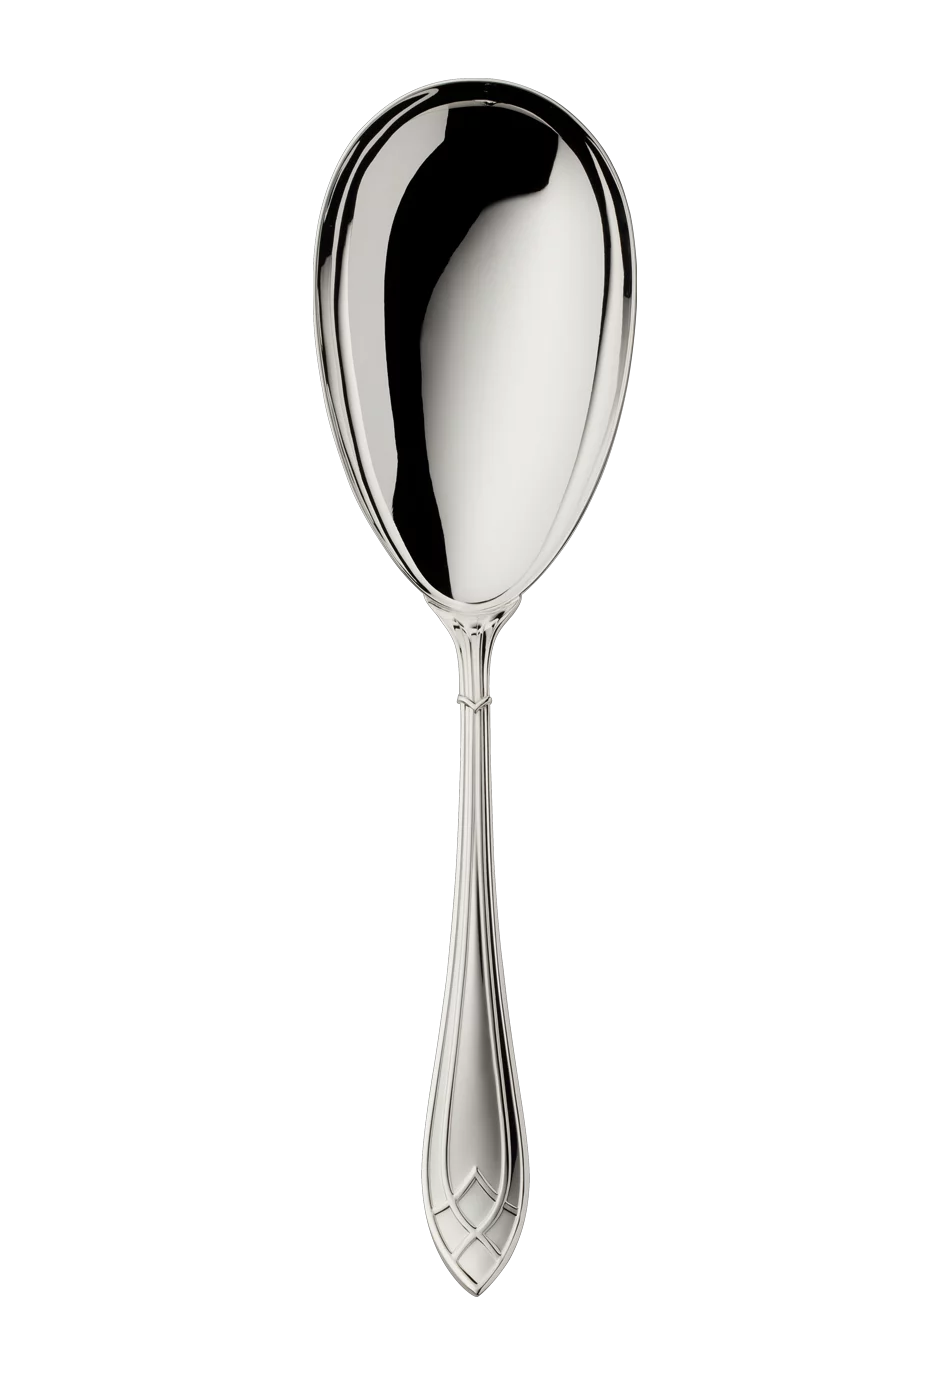 Arcade Serving Spoon (150g massive silverplated)